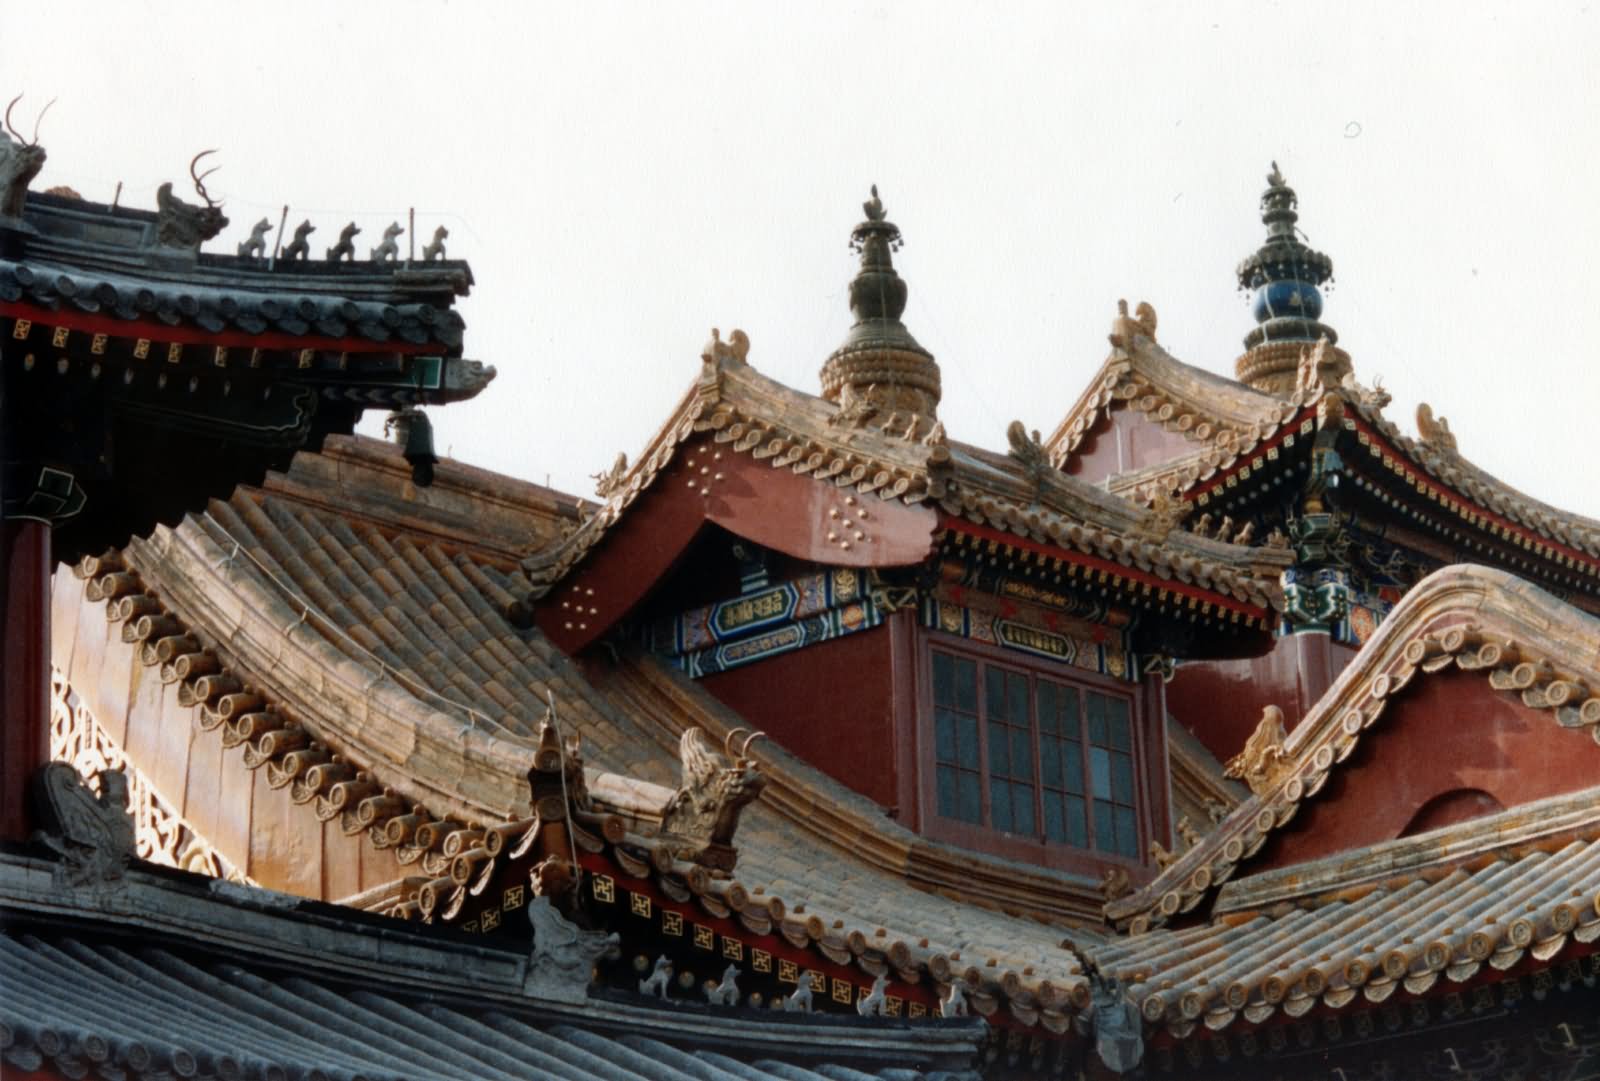 The Yonghe Temple Roof View